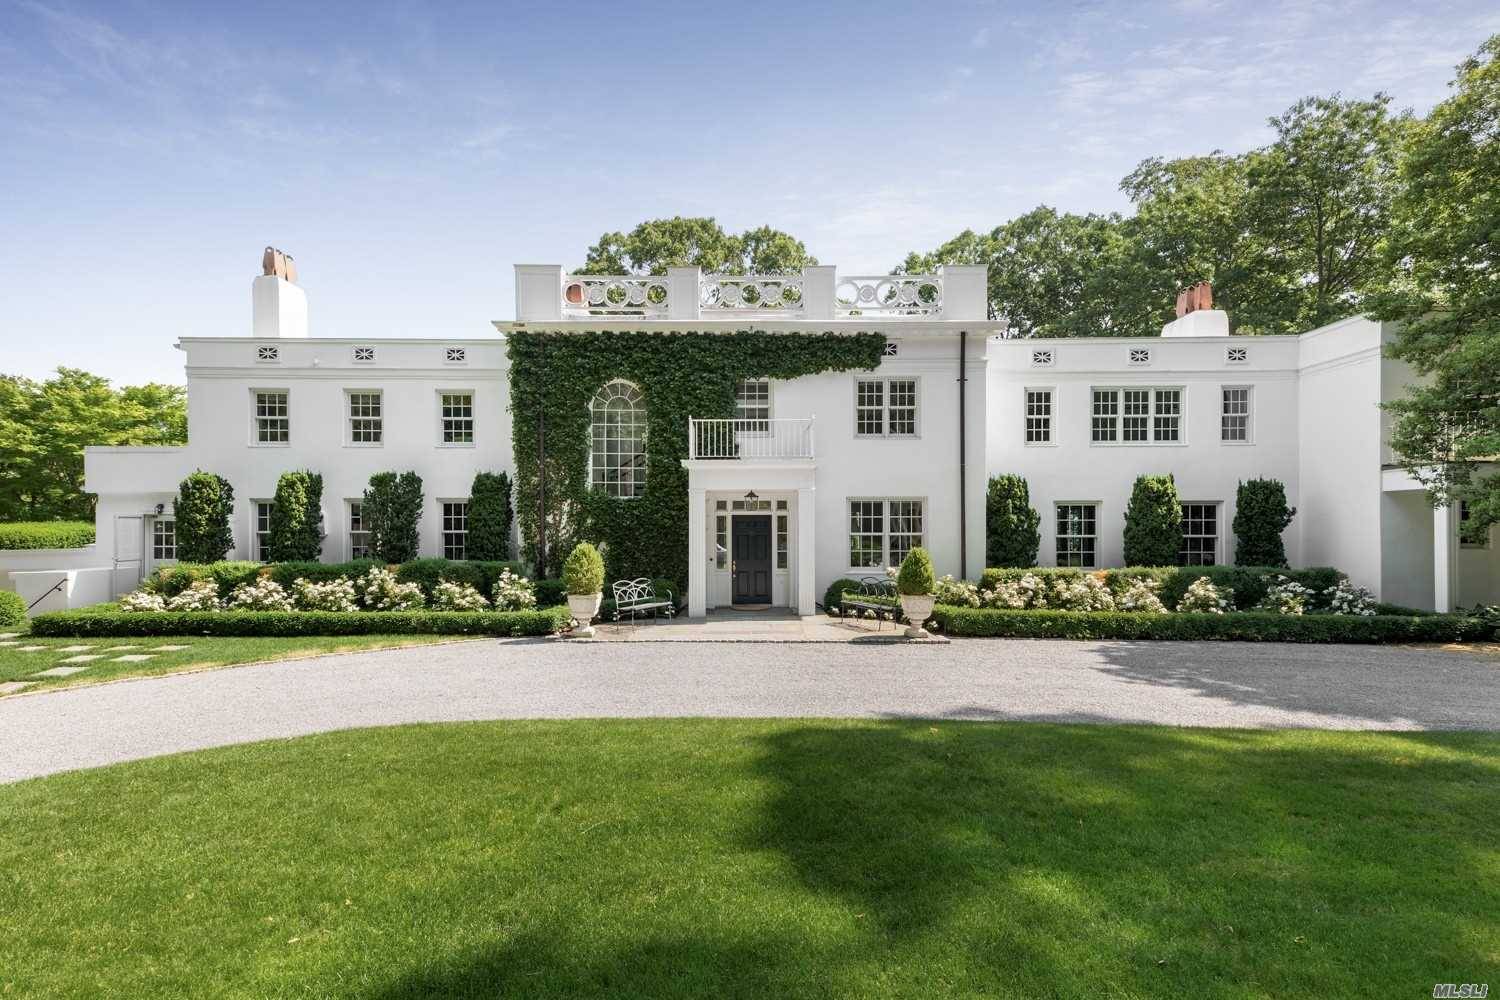 Magnificent Estate with water views over Cold Spring Harbor awaits your escape from the city.